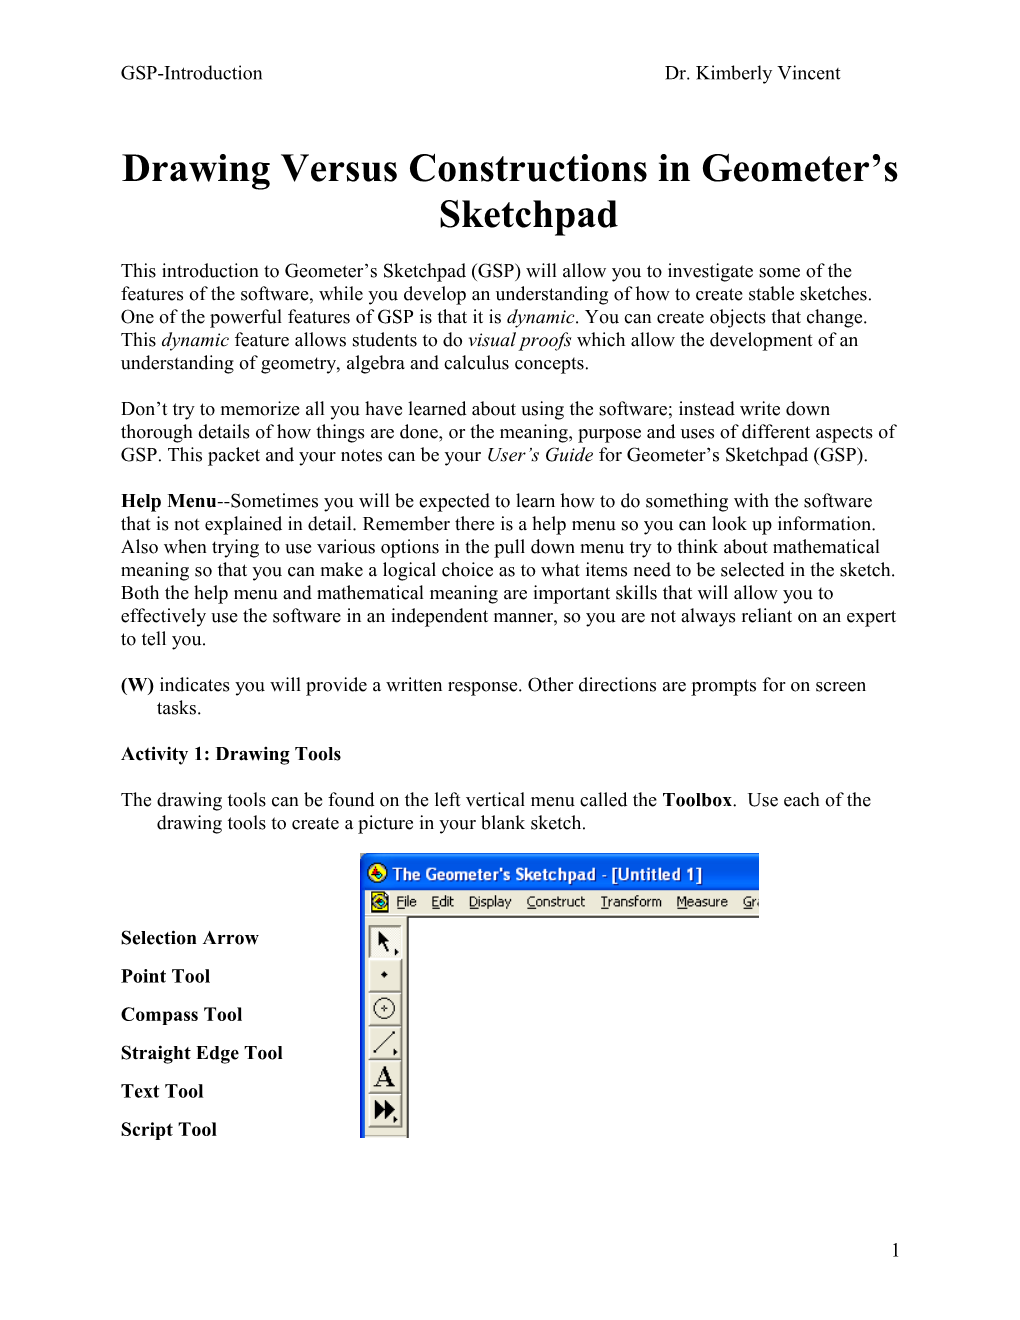 Drawing Versus Constructions in Geometer S Sketchpad